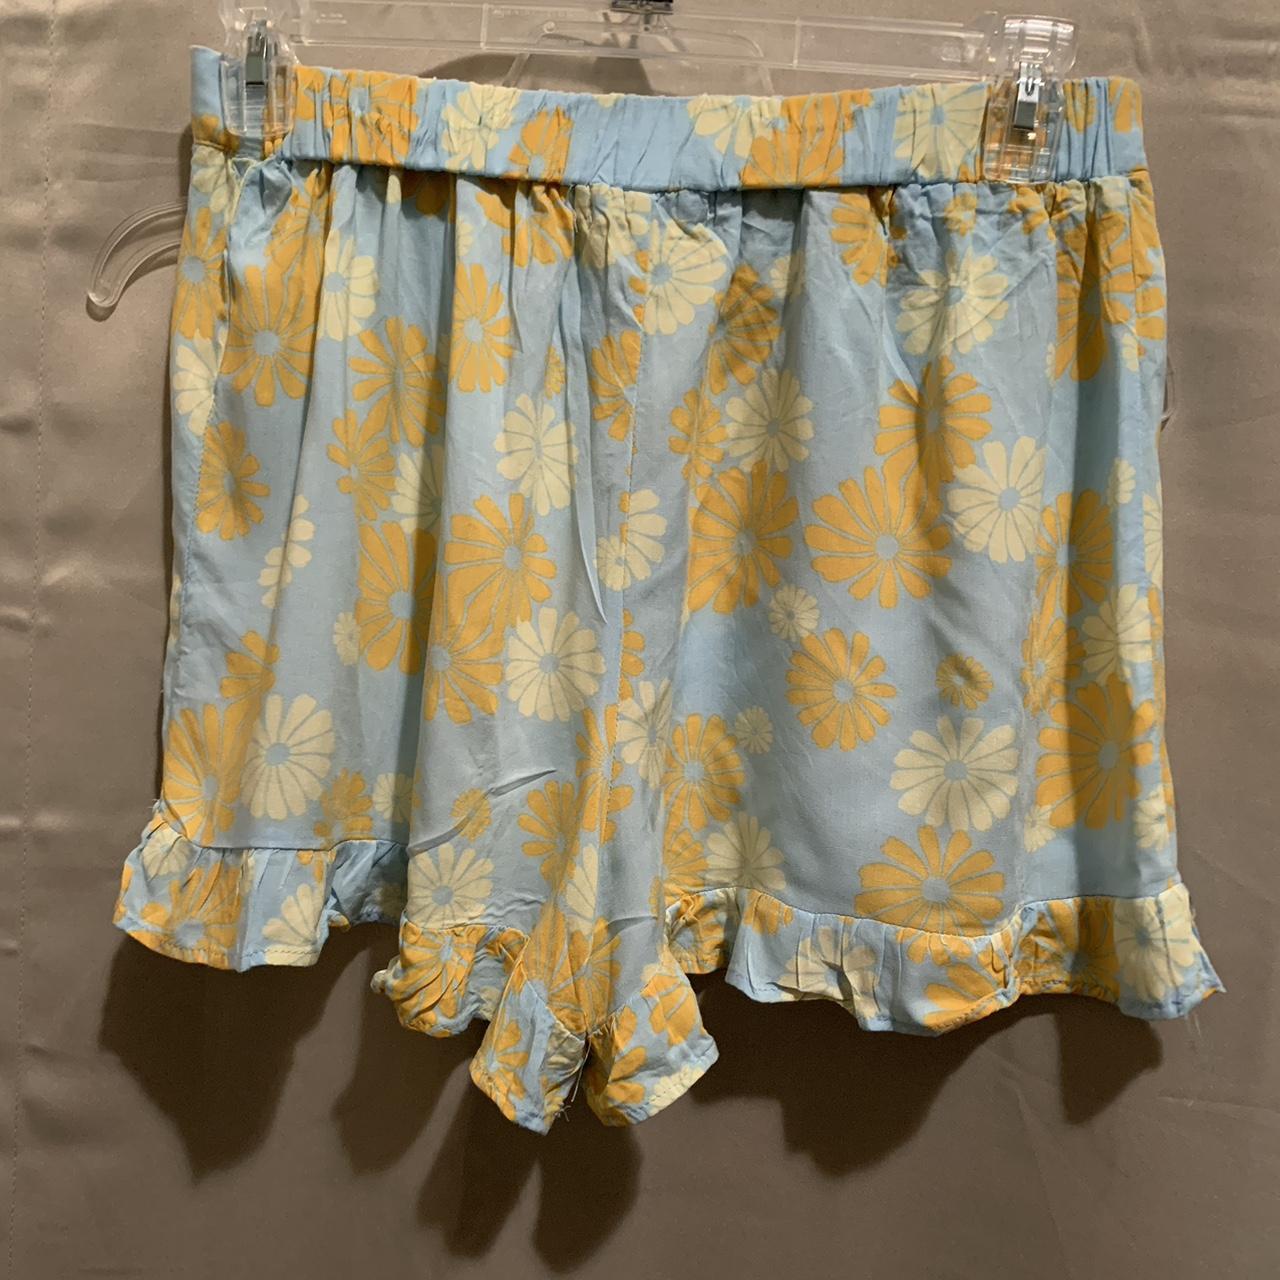 Live To Be Spoiled Women's Blue and Yellow Shorts (2)